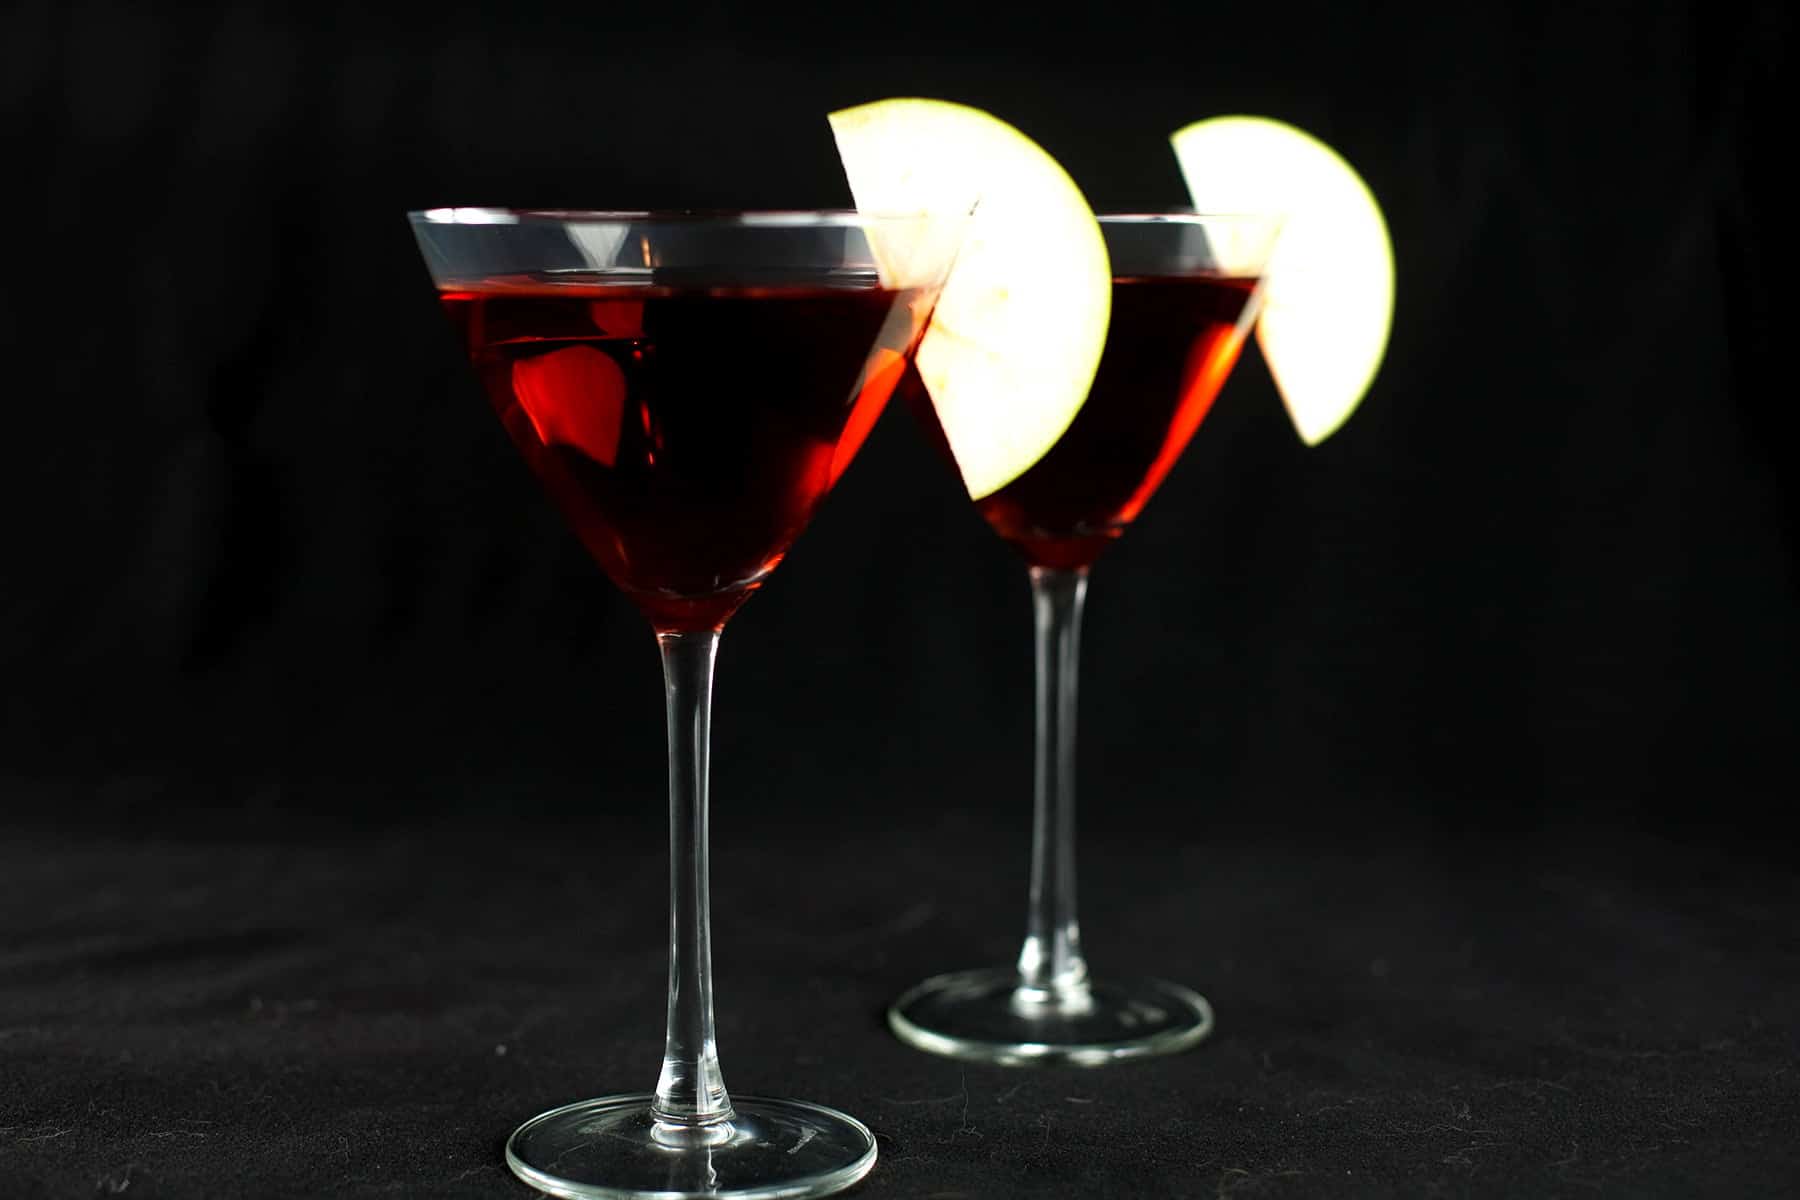 Two Candy Apple Martinis - large martini glasses are filled with a red liquid, and garnished with apple slices.